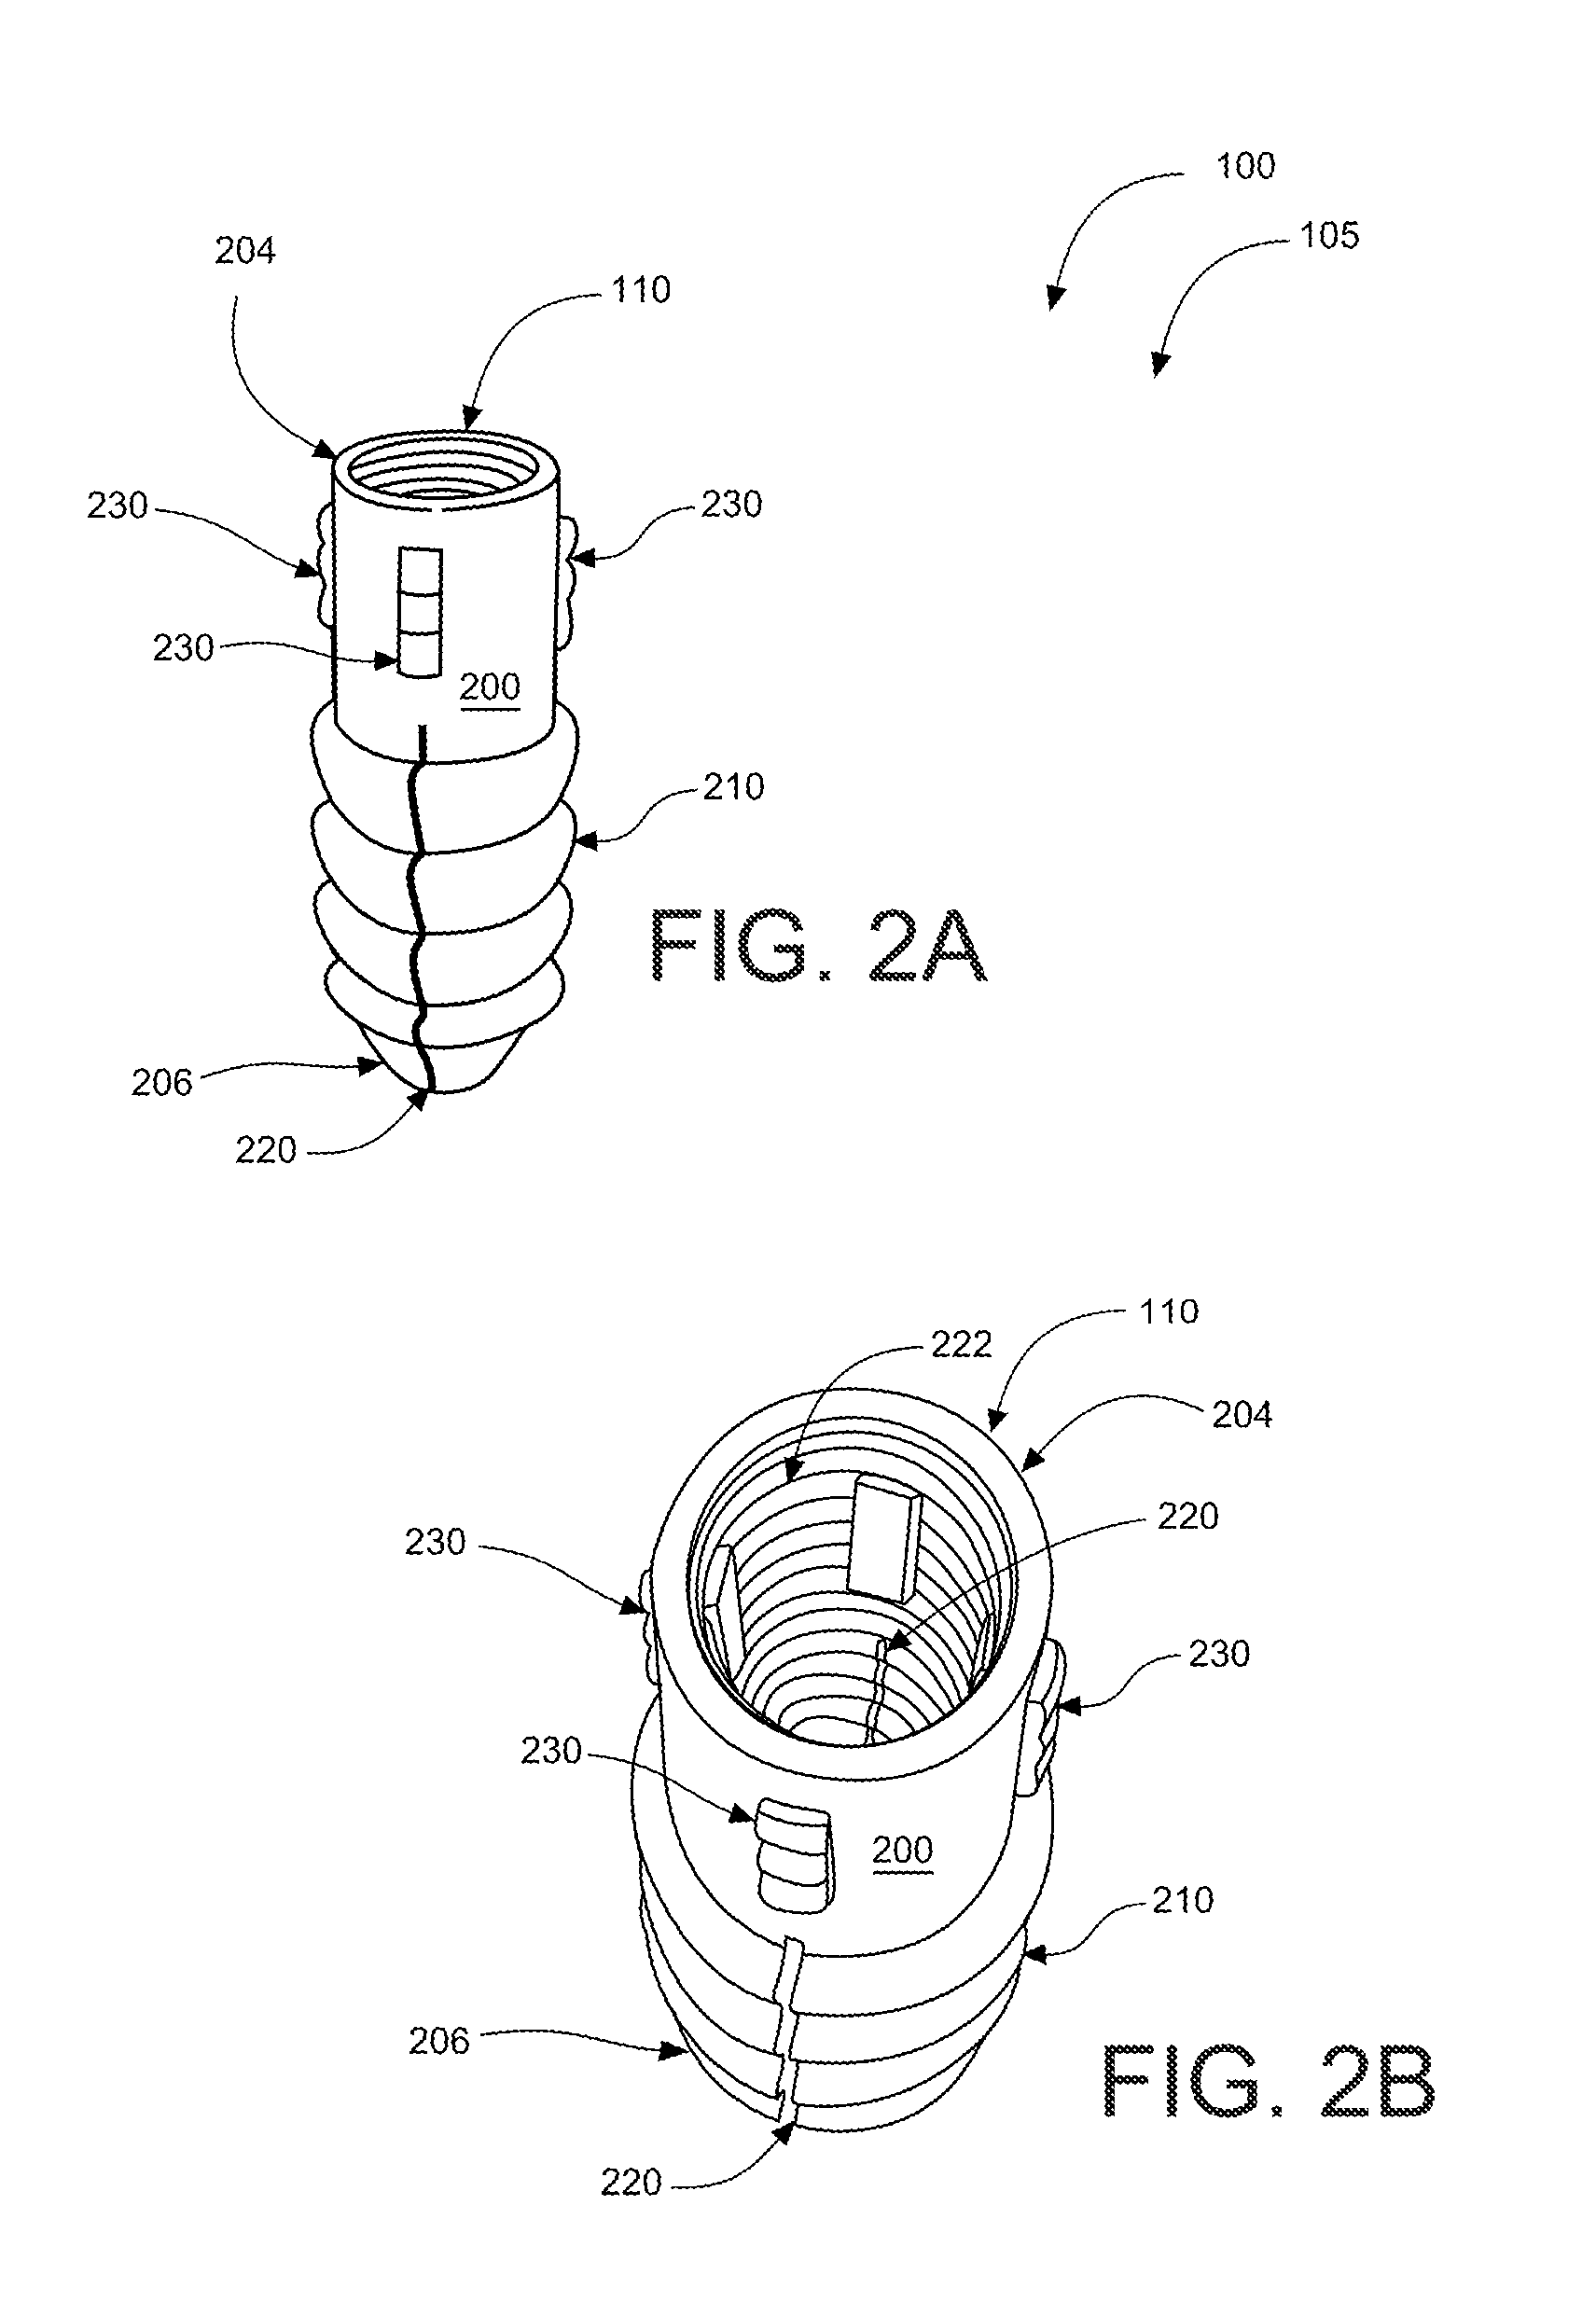 Anchor and toothscrew systems